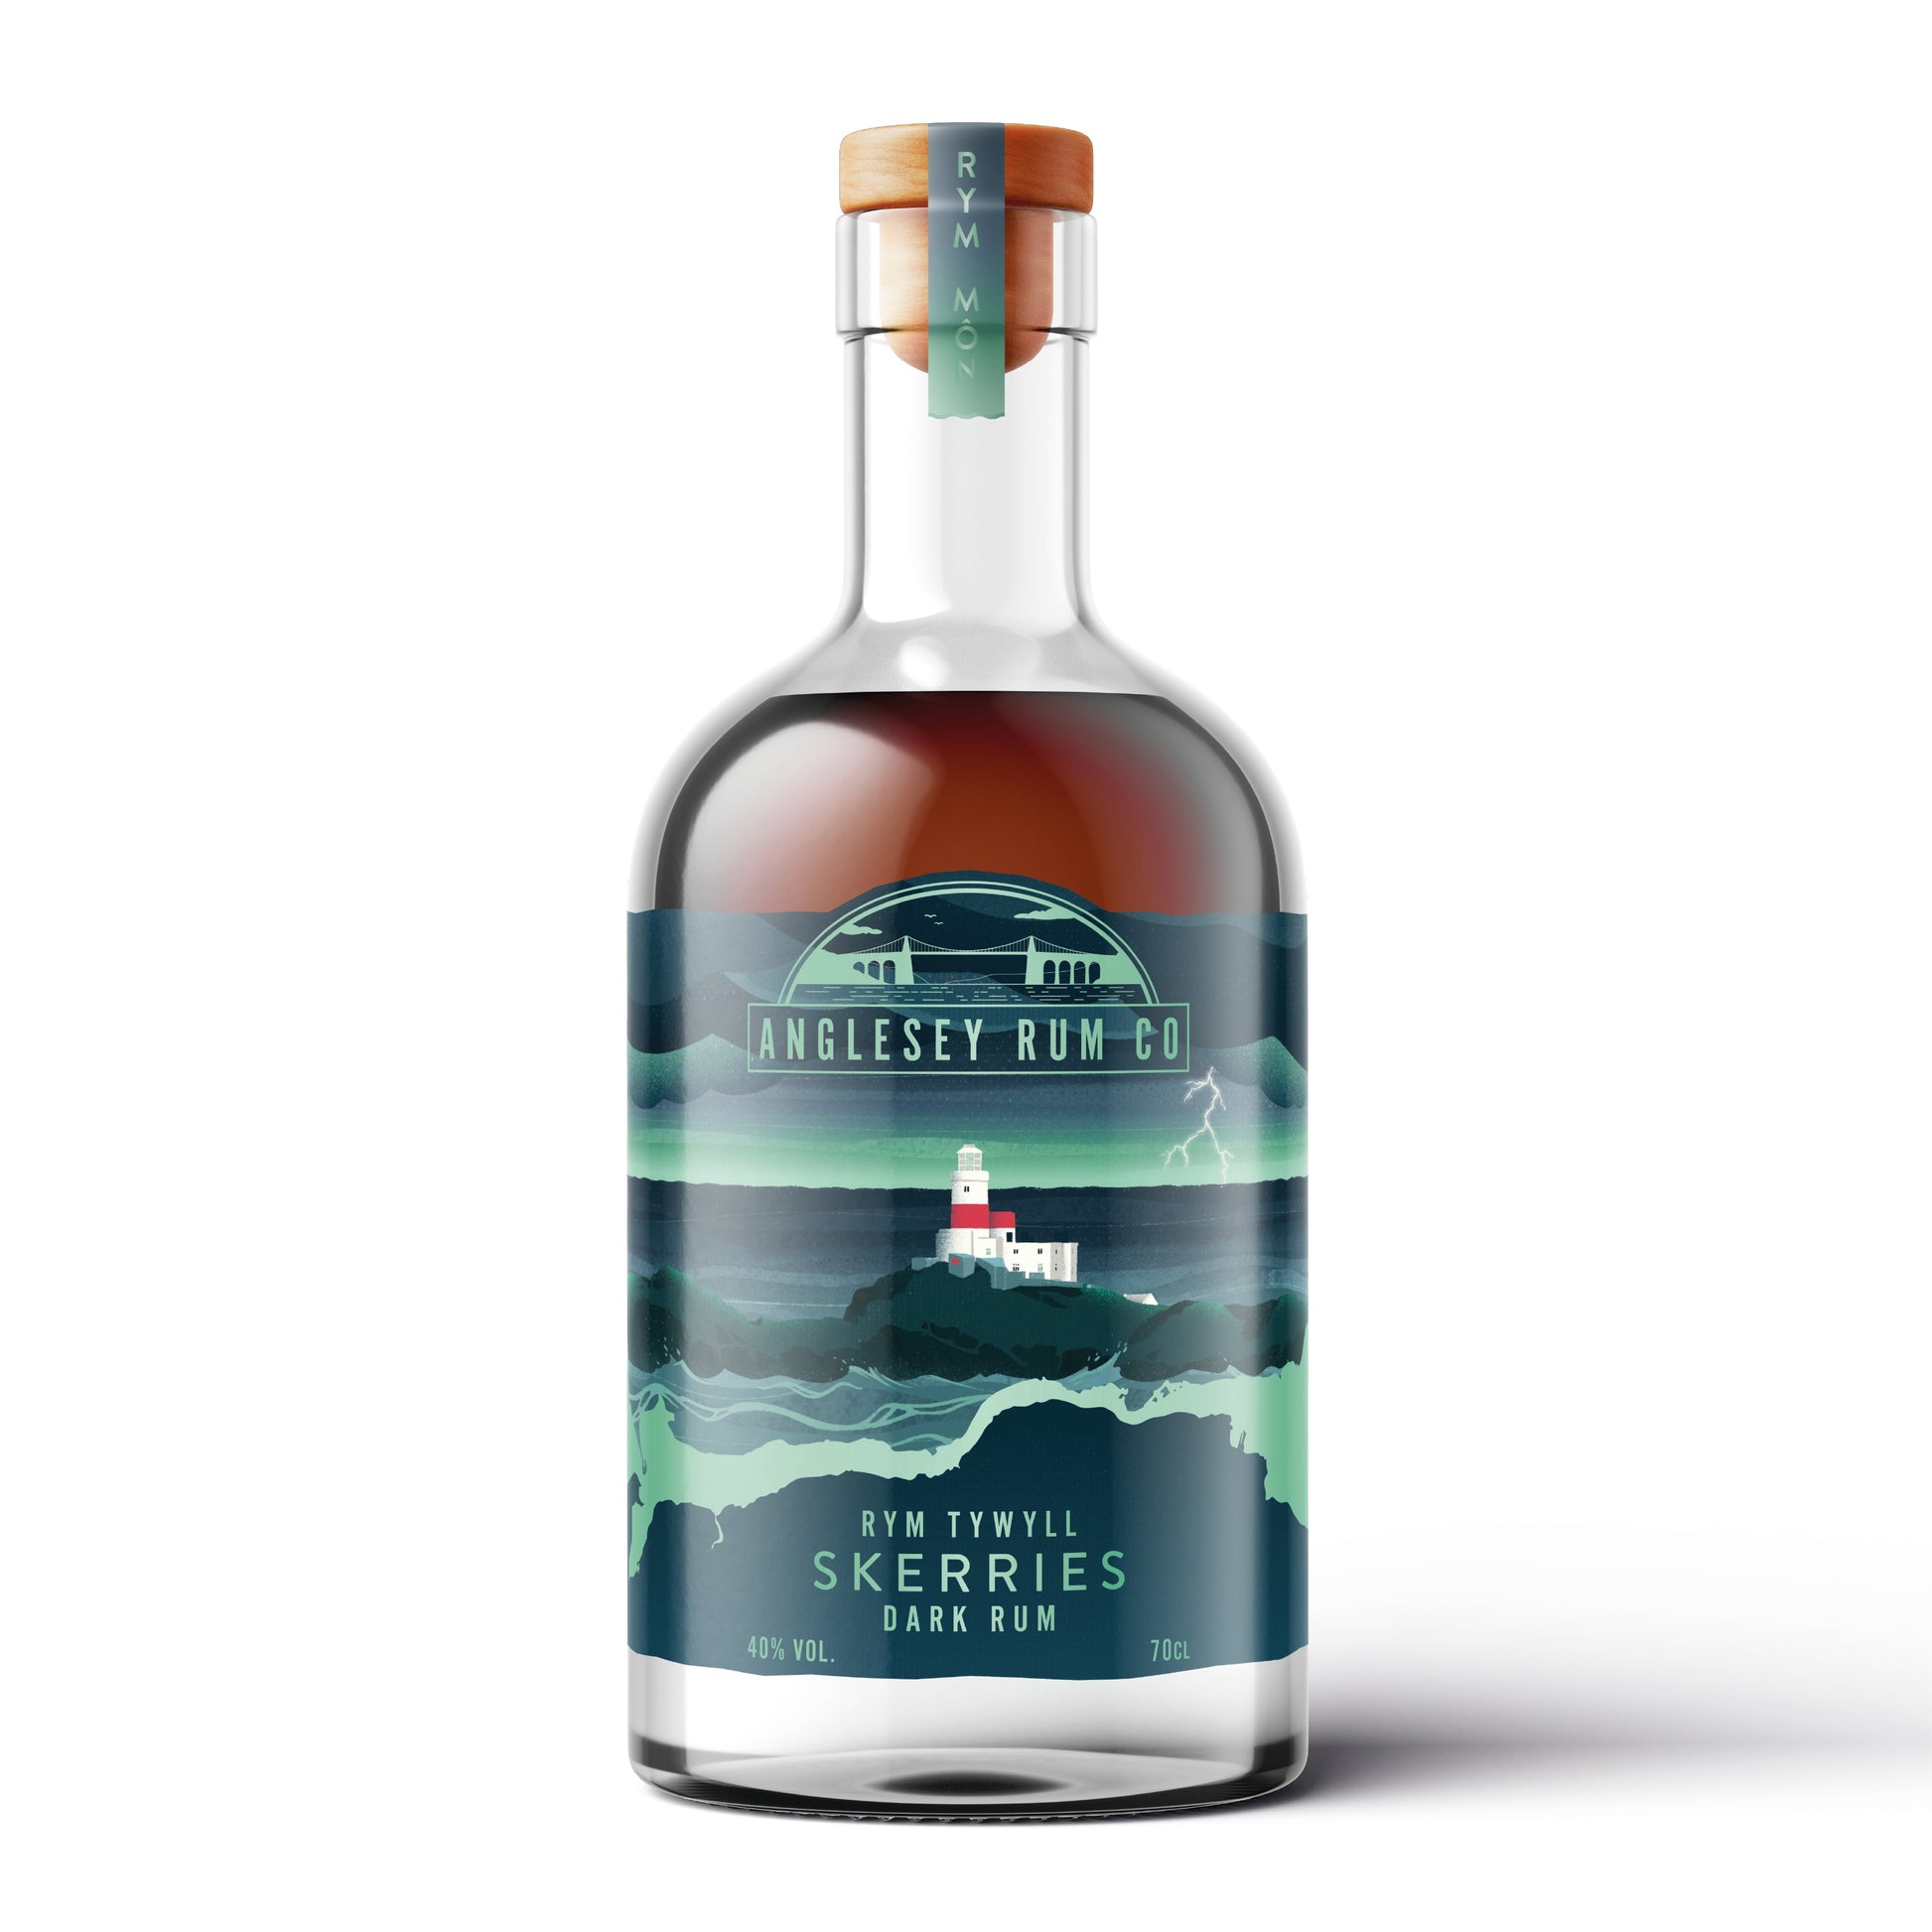 Anglesey Rum Co - Craft Small Batch Welsh Rum - Rym Tywyll Skerries